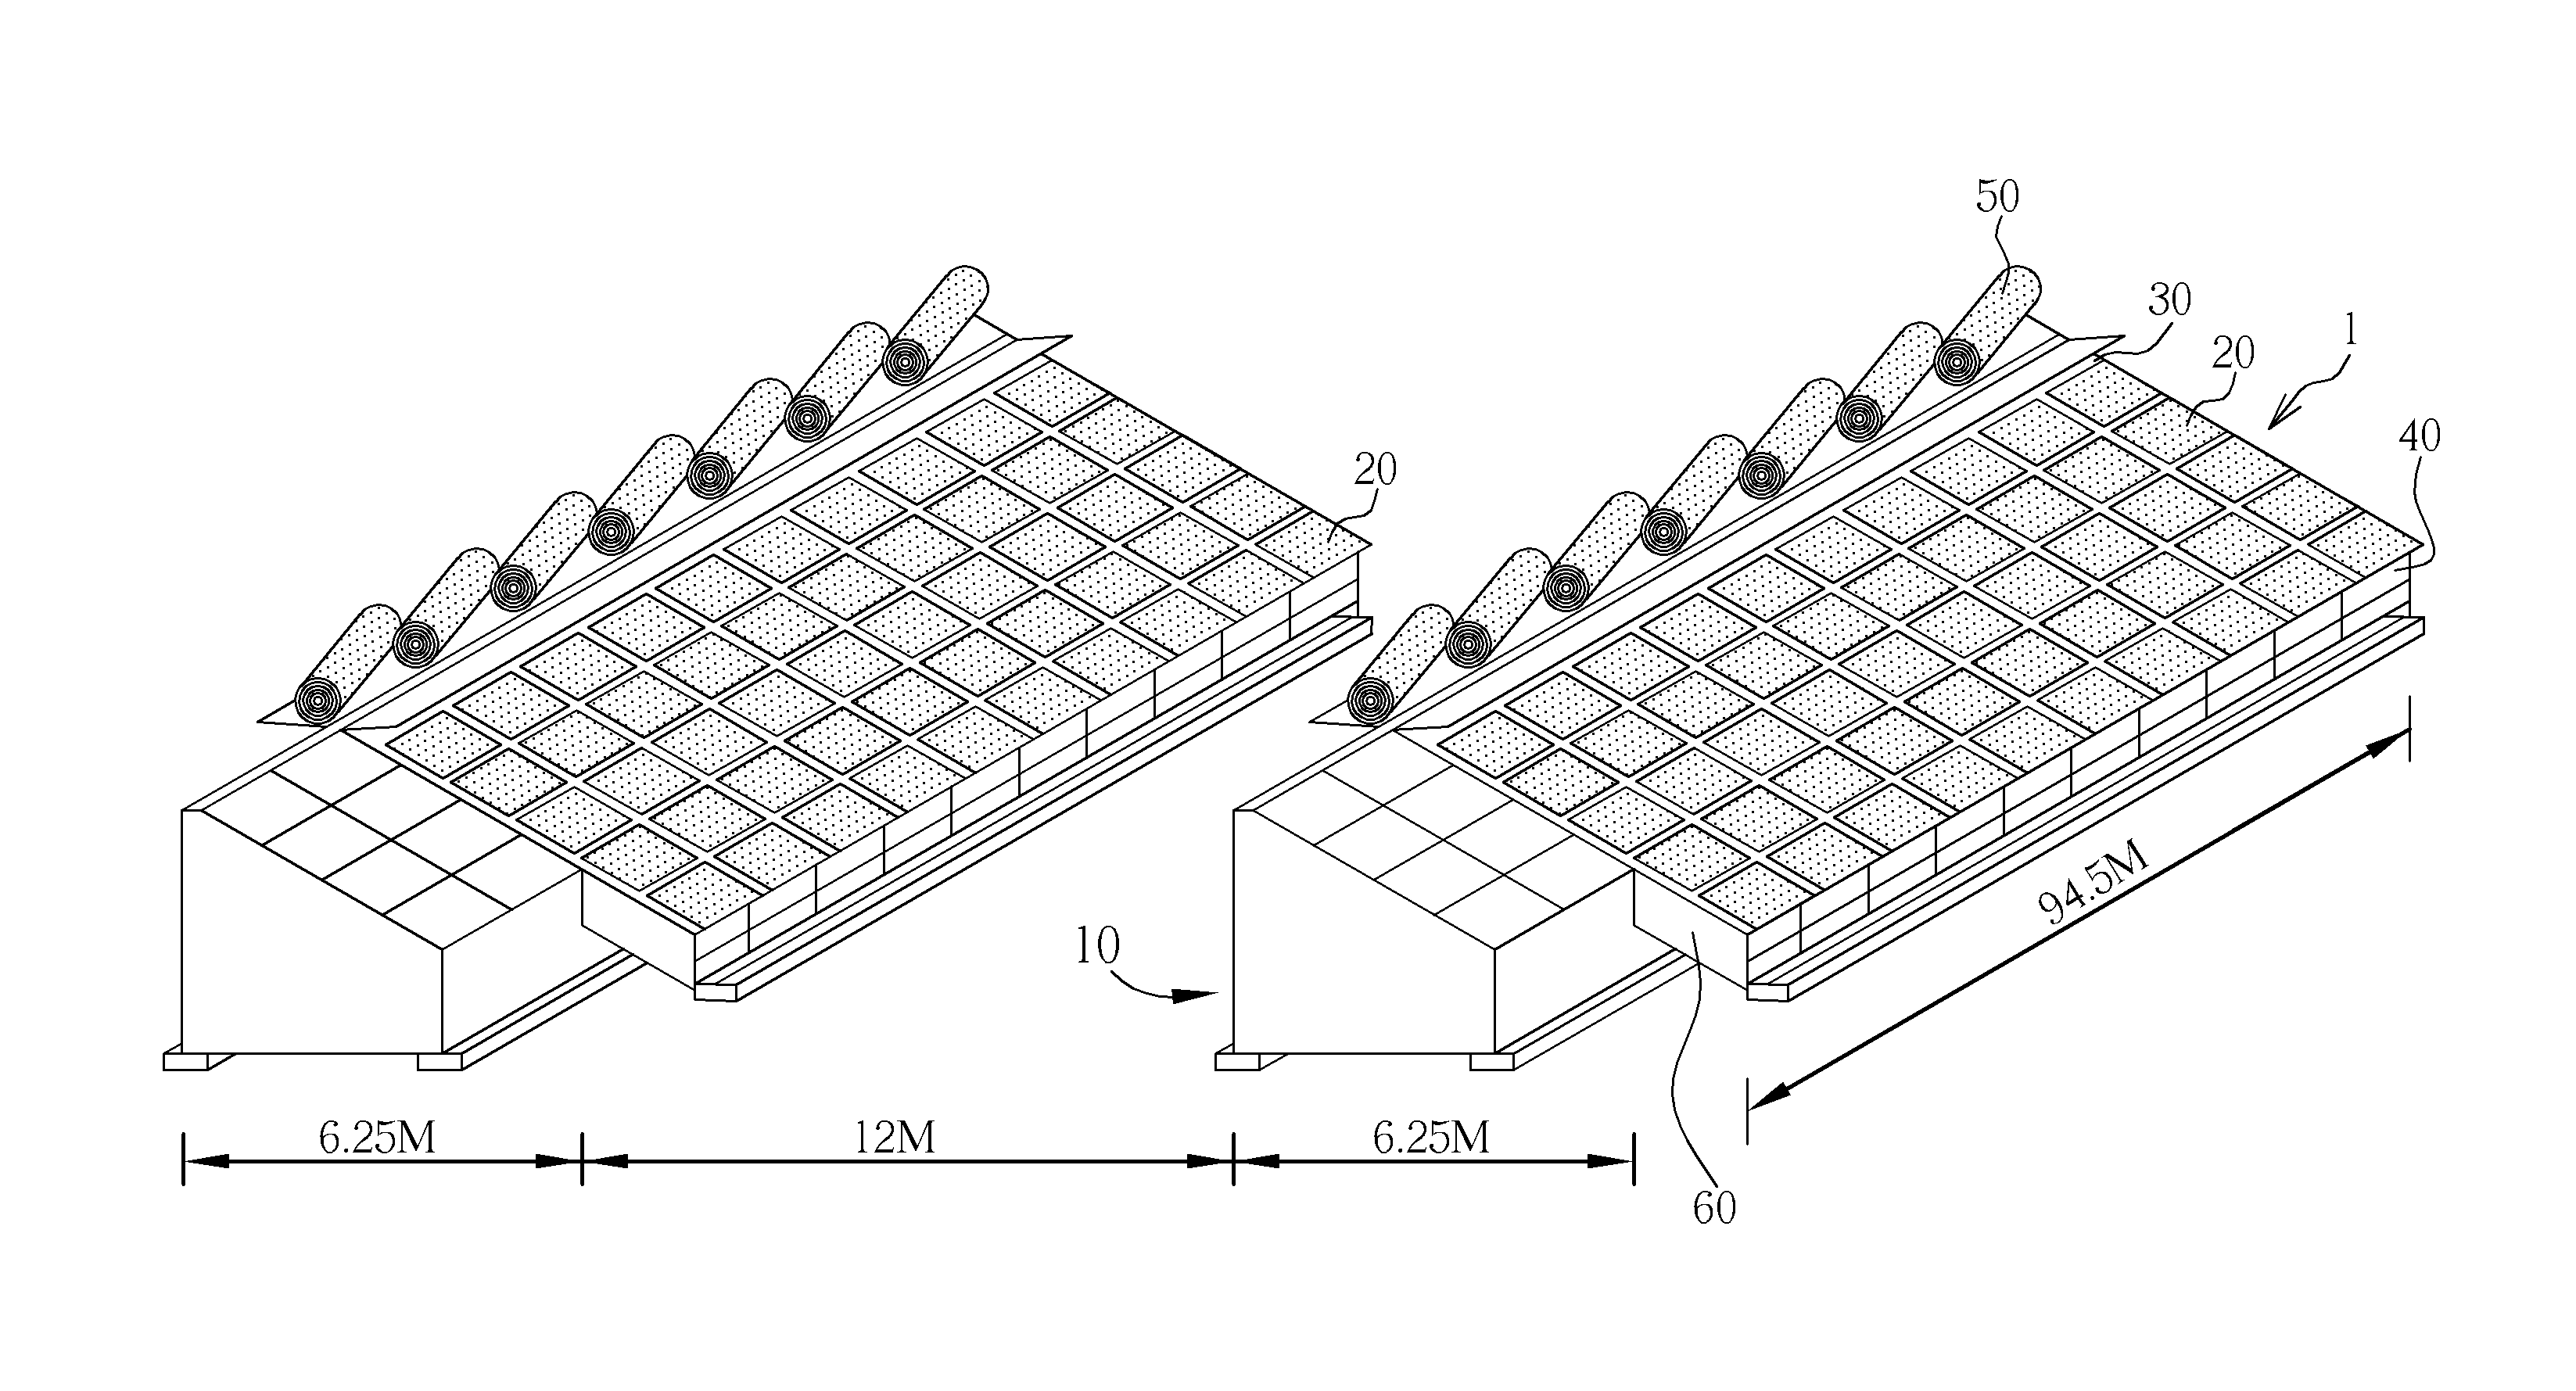 Photovoltaic greenhouse structure